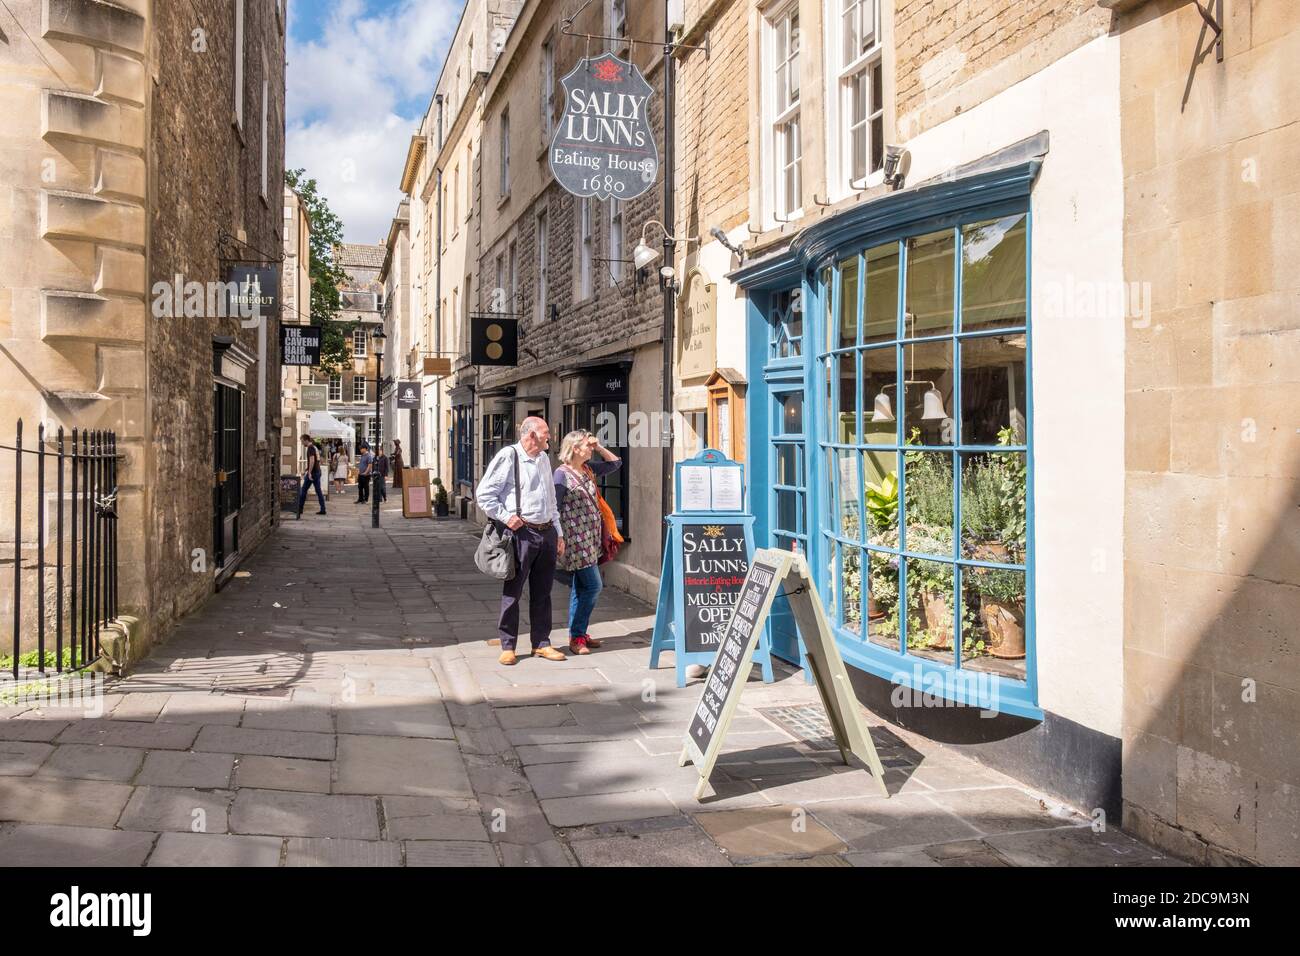 Tourists looking at menu at Sally Lunns Eating House, Bath, Somerset, England, GB, UK Stock Photo